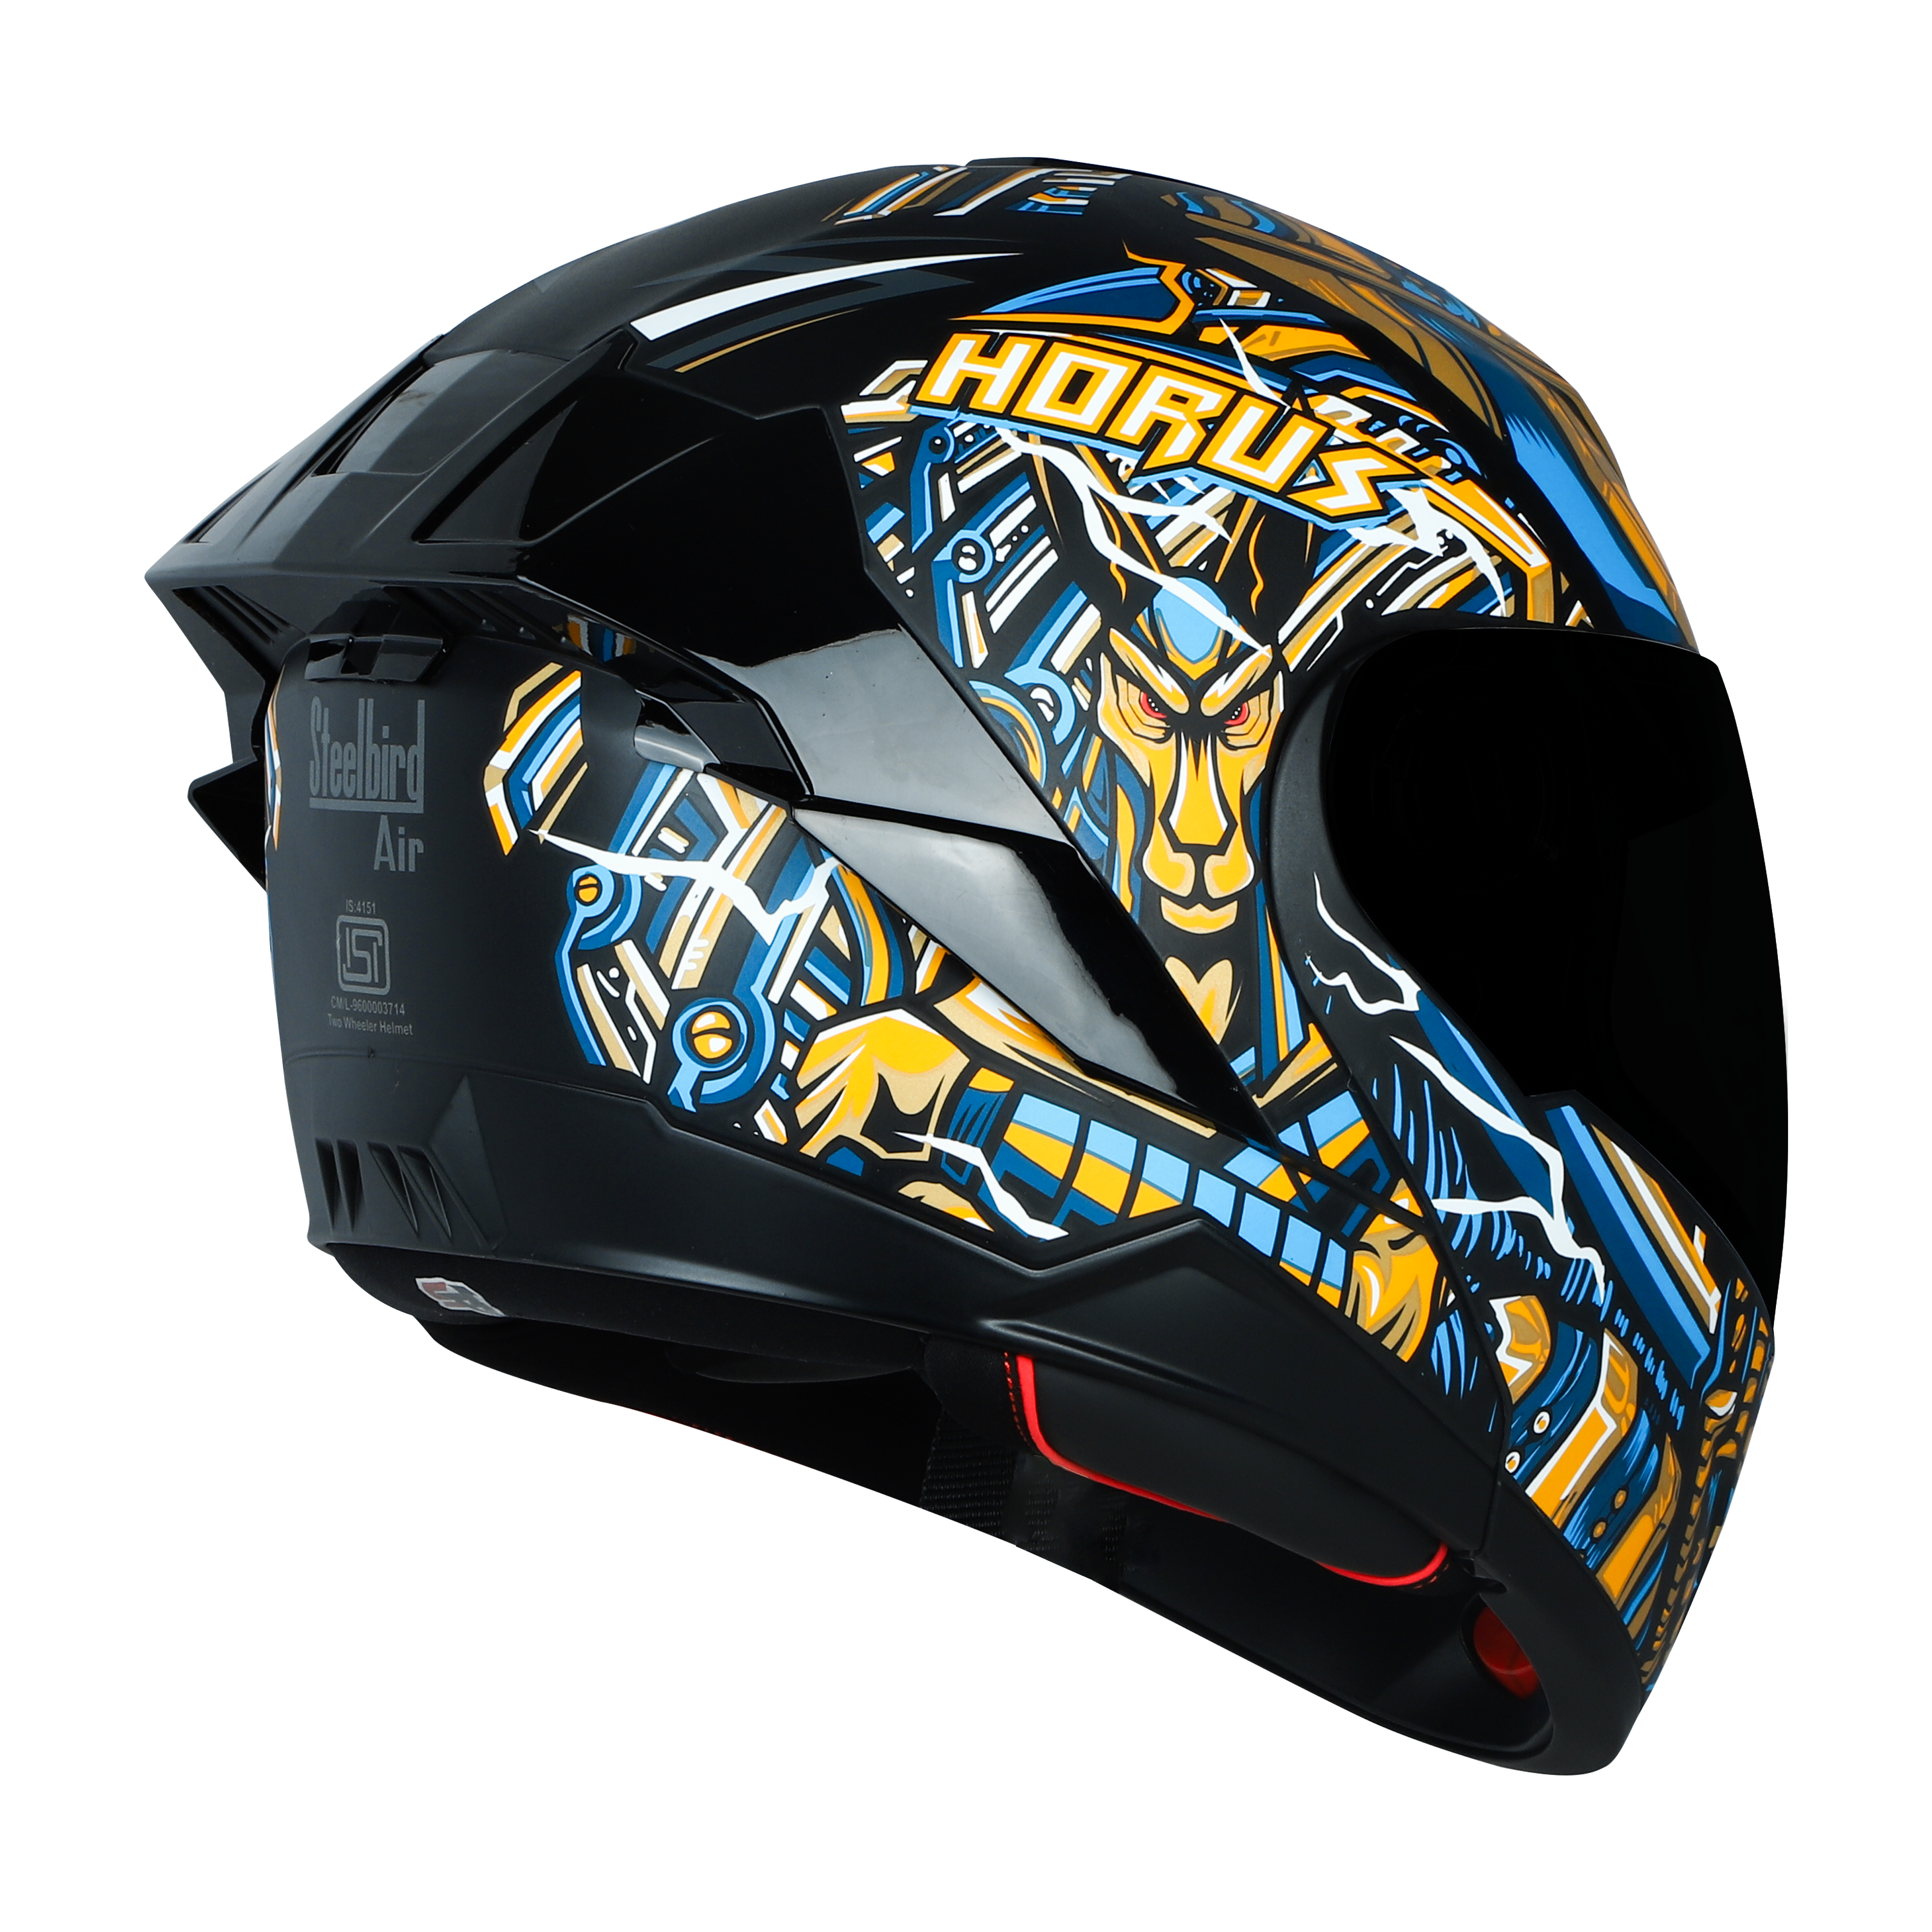 SBA-8 ISS HORUS GLOSSY BLACK WITH GOLD